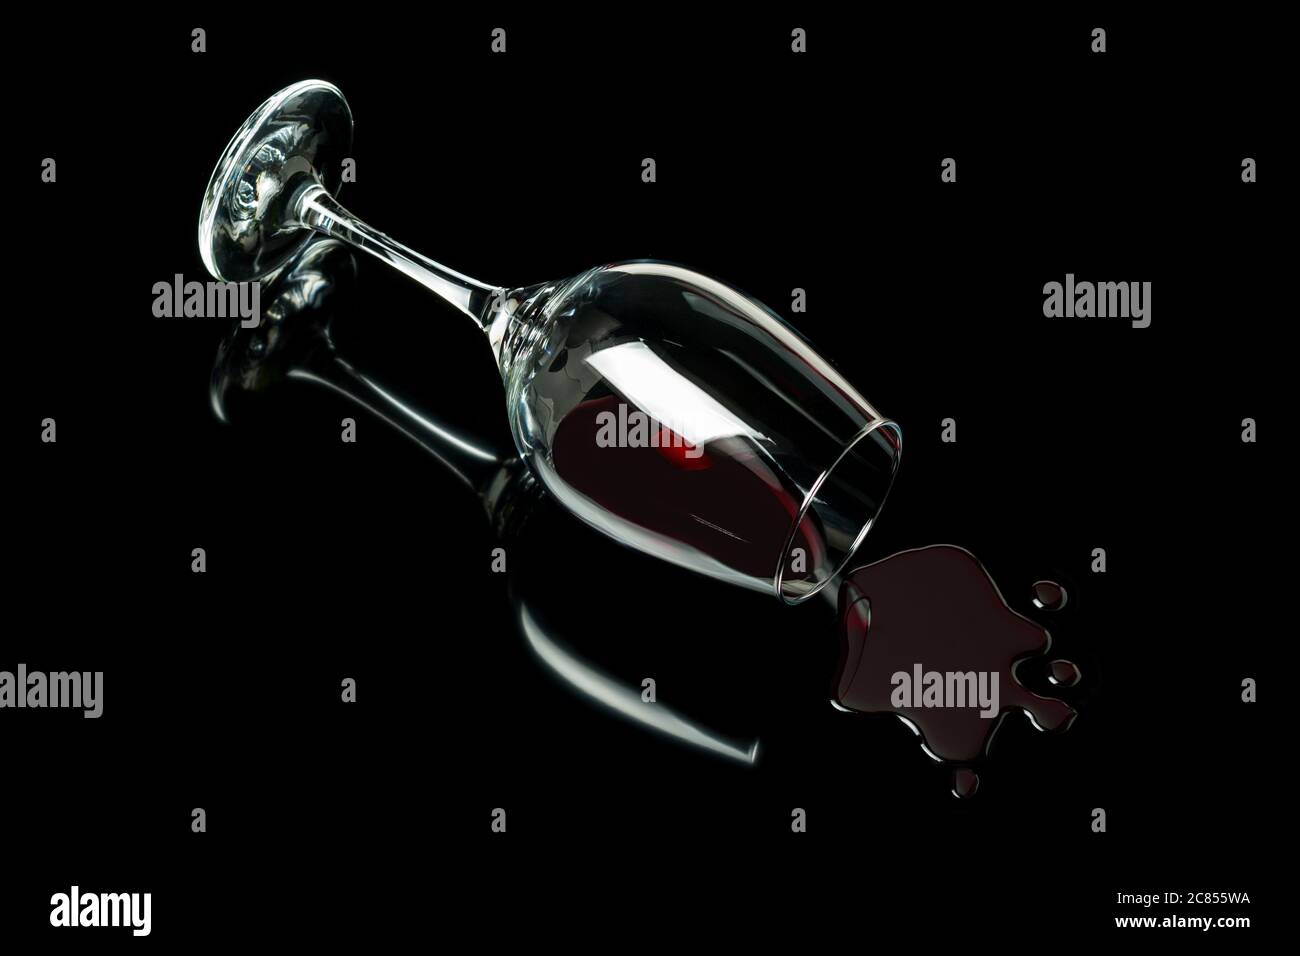 Spilled wine glass on a black background with reflection. Alcohol abuse concept. Stock Photo